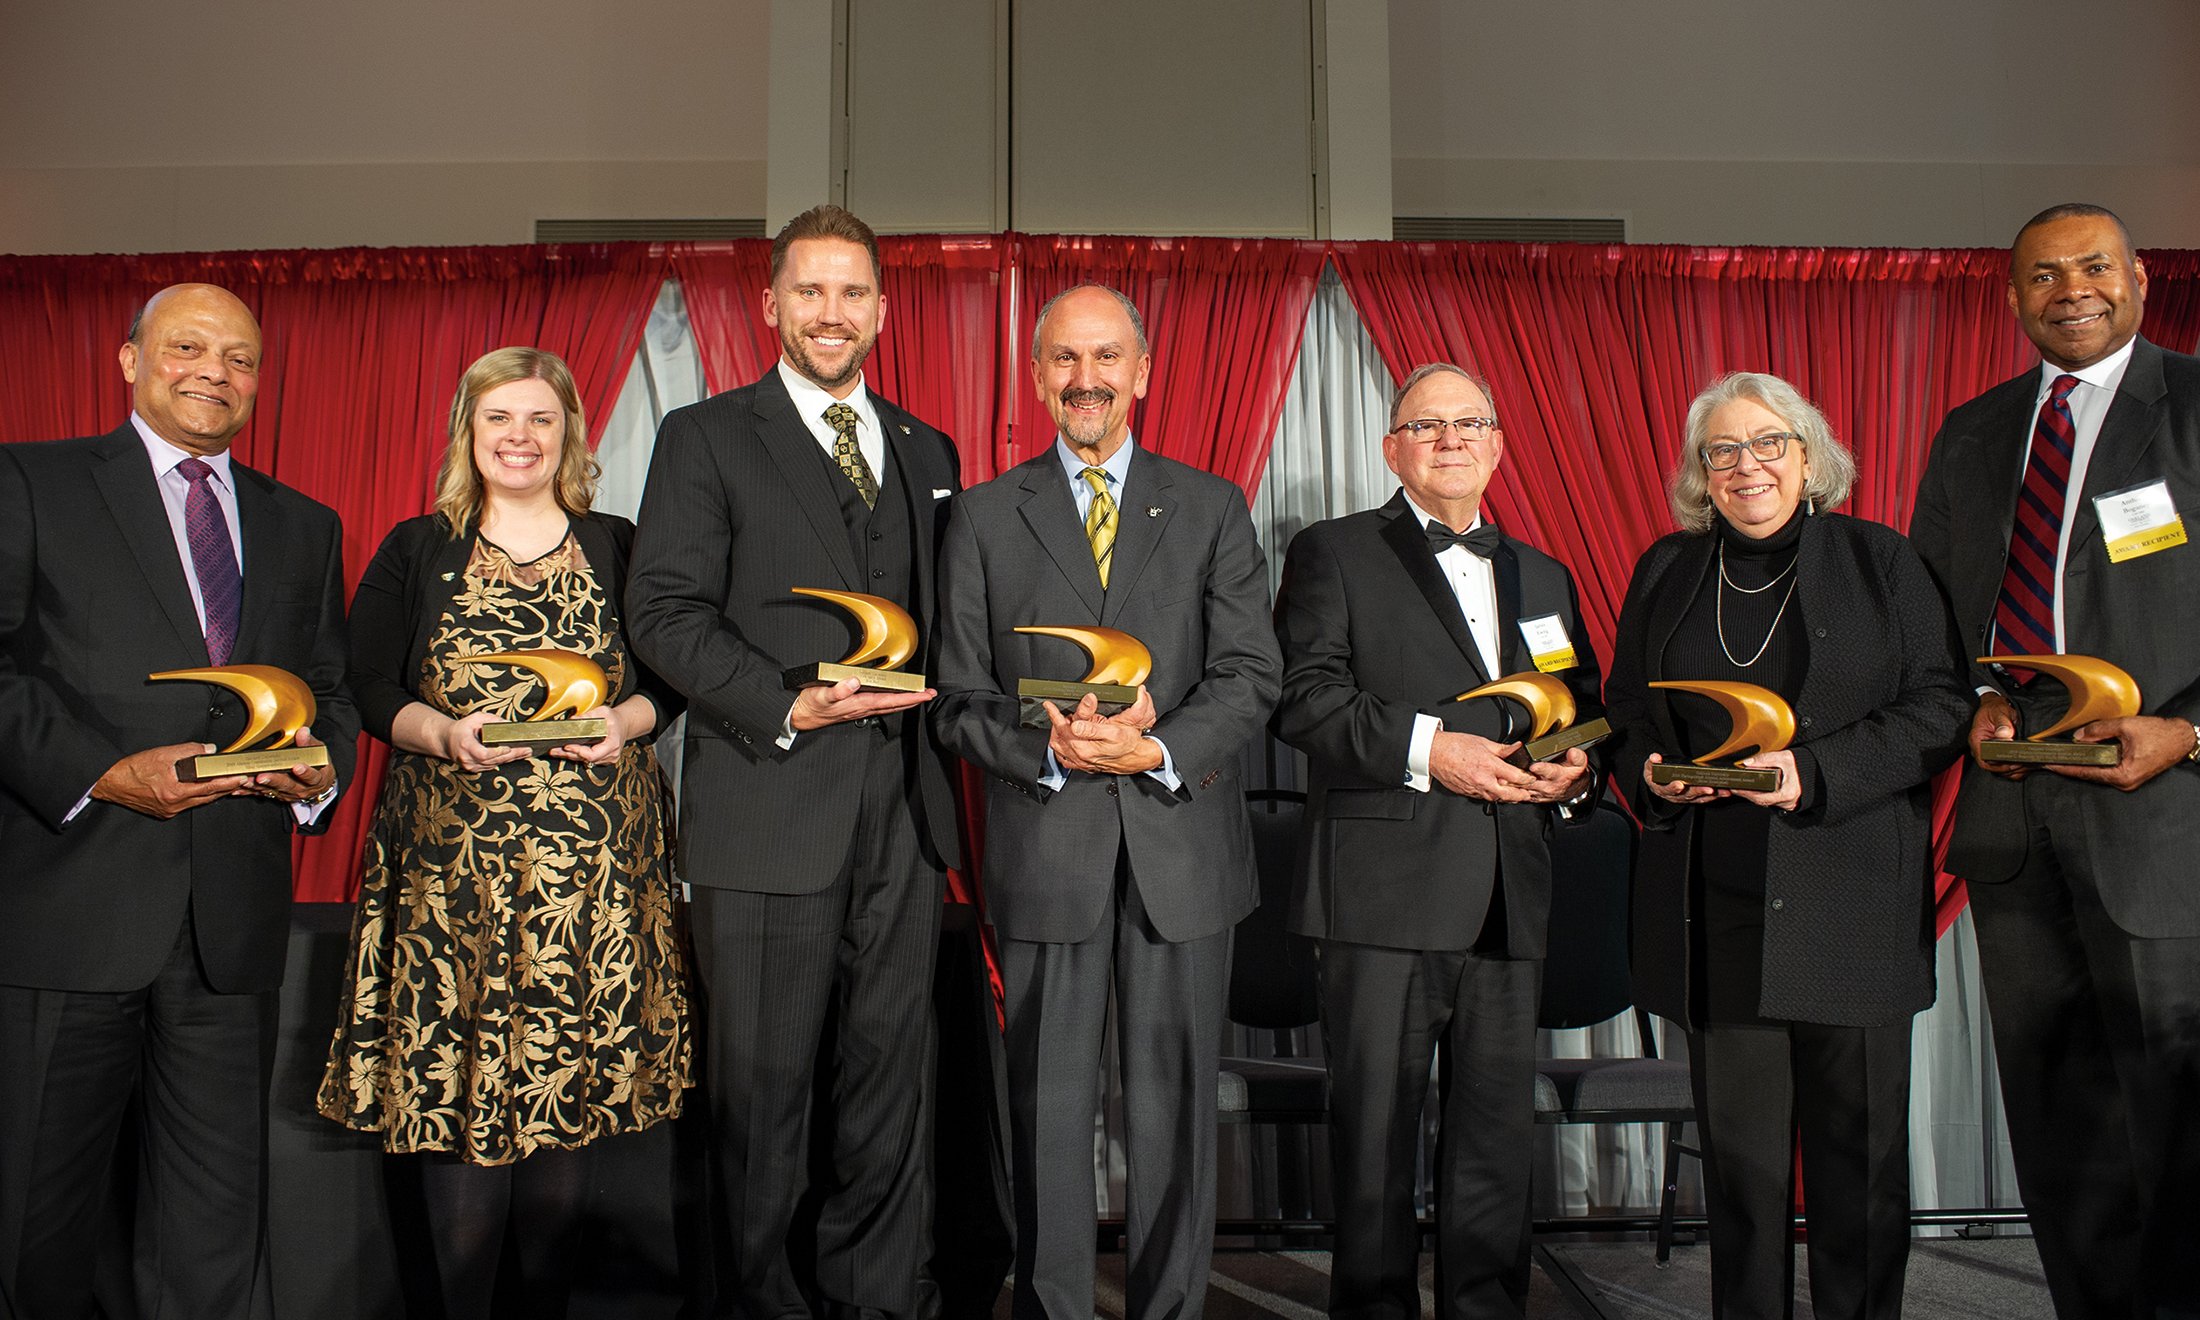 A group of people holding awards